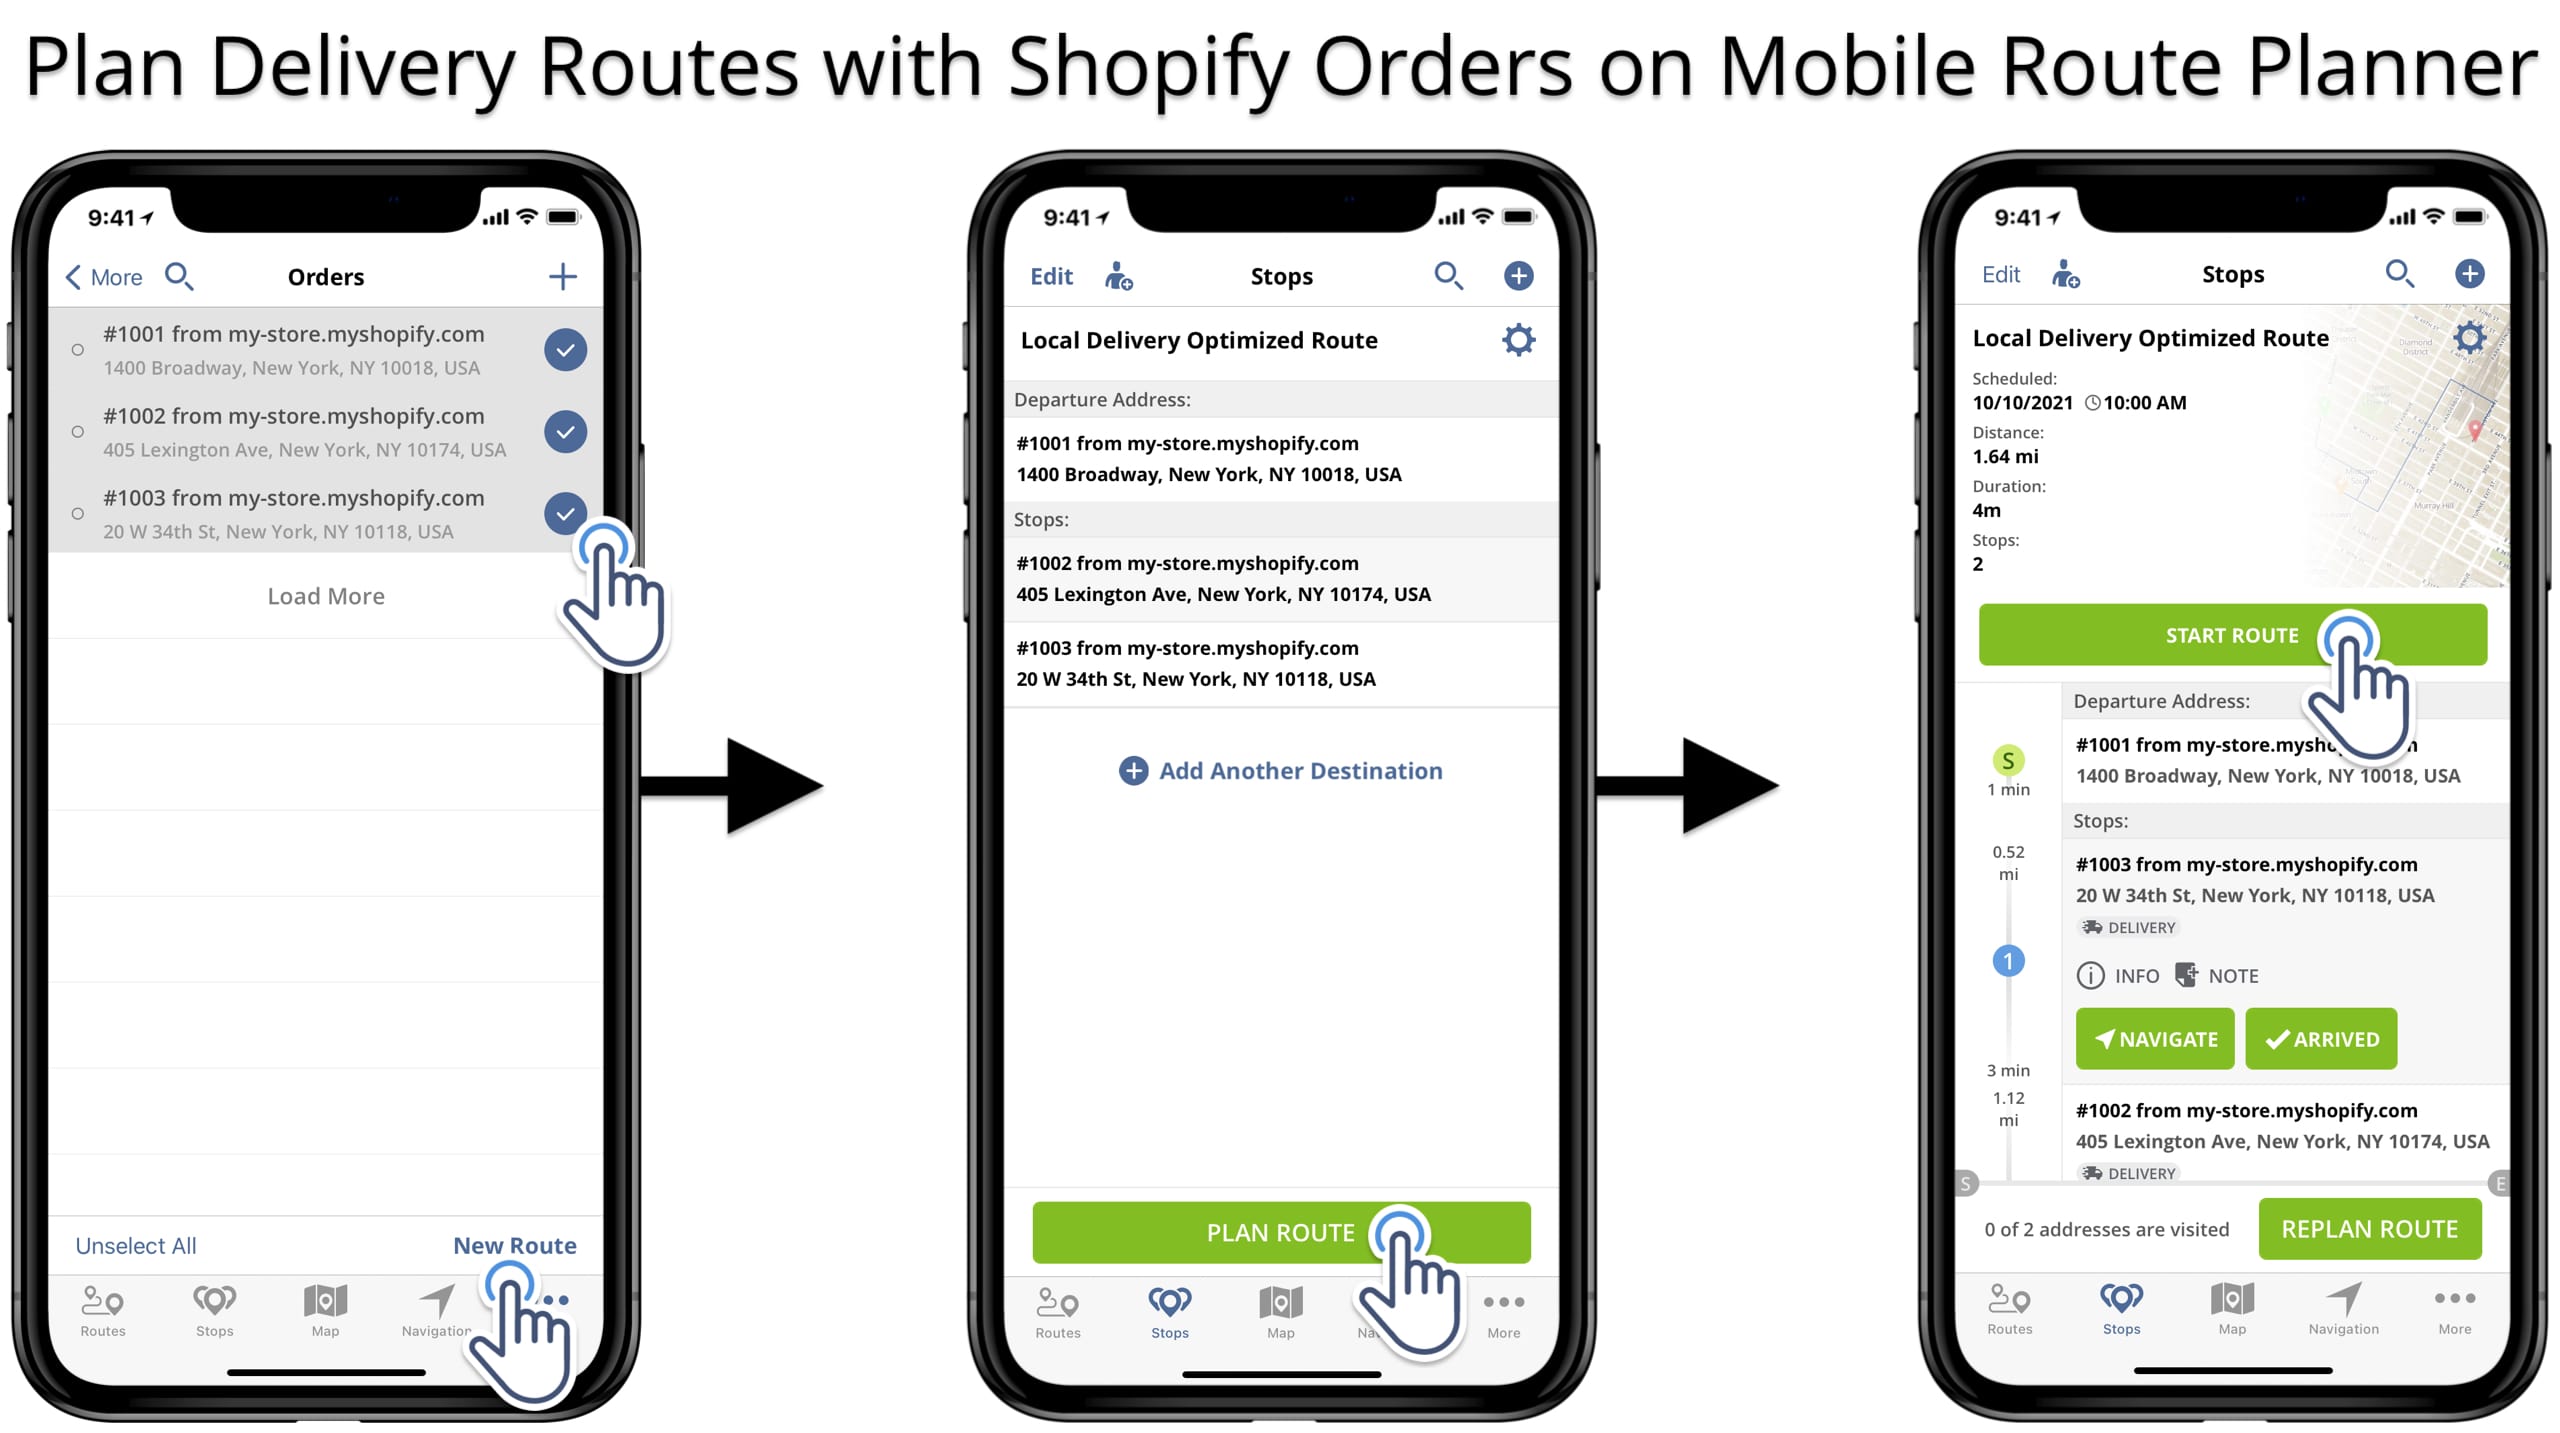 Plan driver and delivery routes with scheduled Shopify orders on the mobile route planner app.